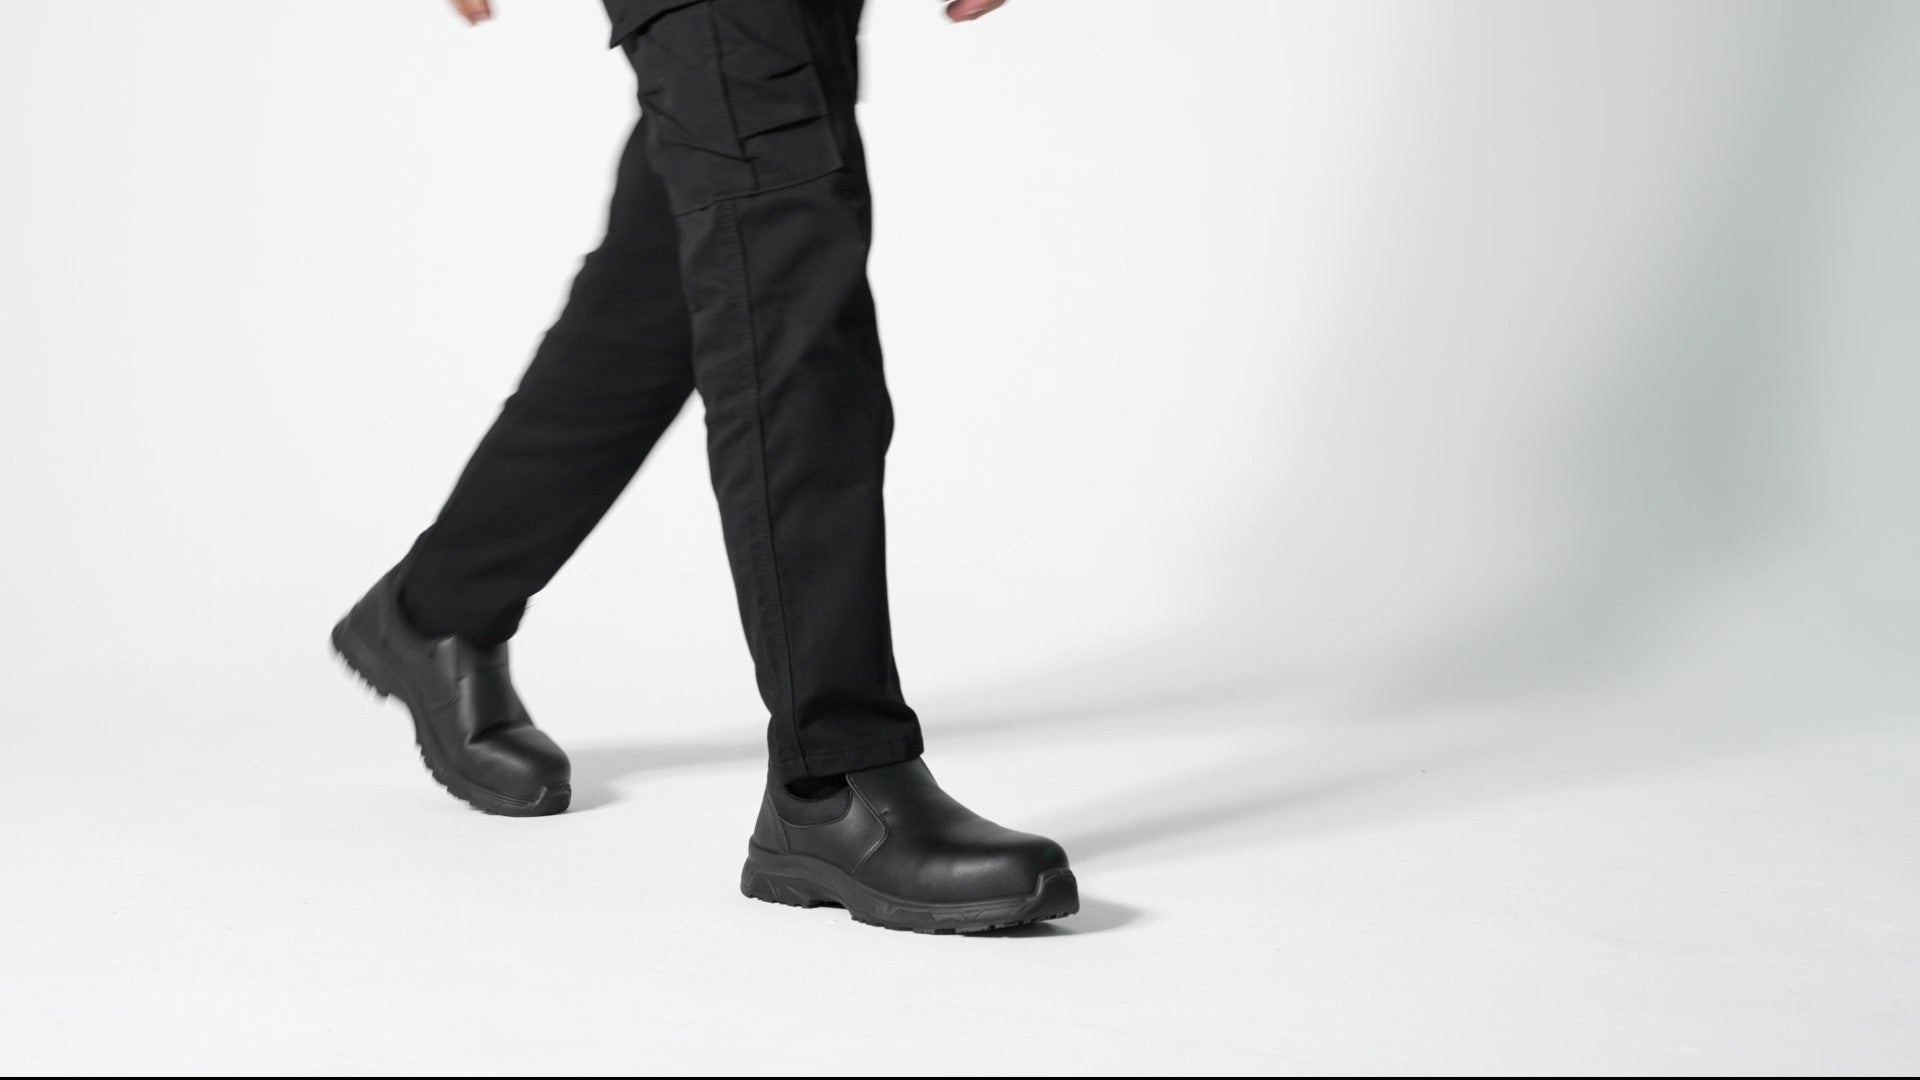 The Catania Black from Shoes For Crews, made in Italy, is a slip-resistant shoe with a composite safety toe cap and a puncture-resistant midsole, product video.